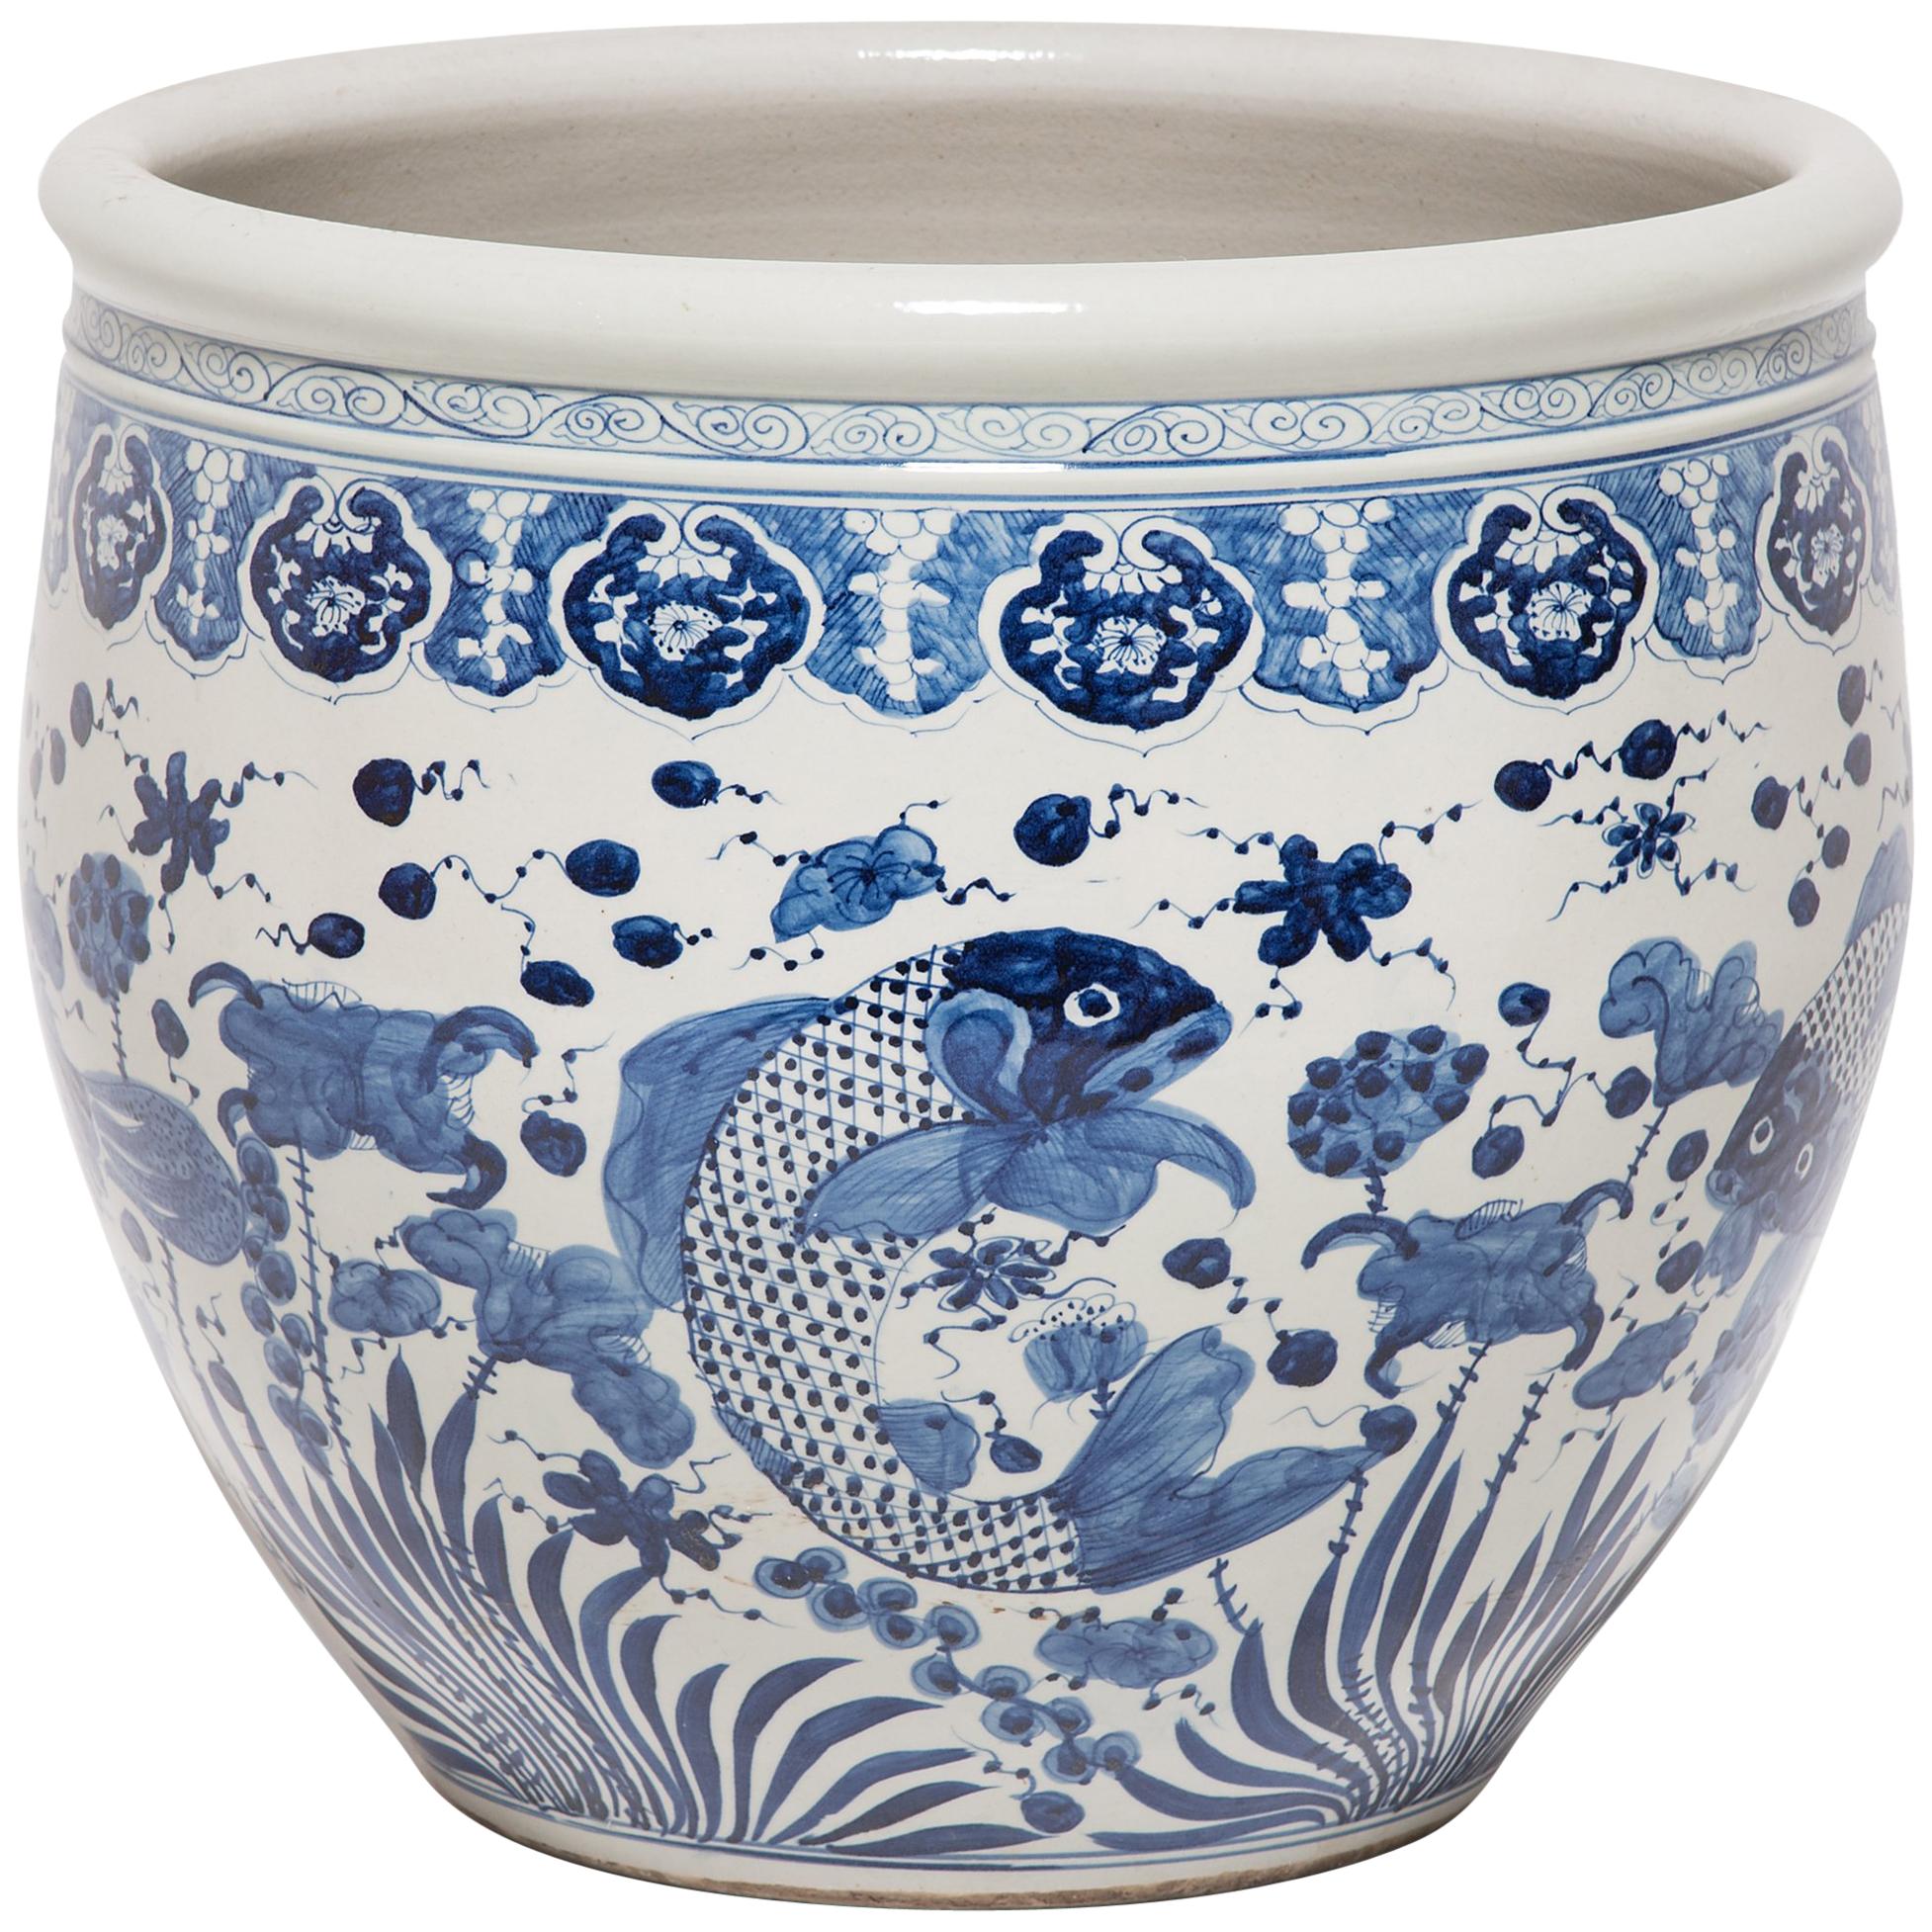 Chinese Blue and White Fish Bowl